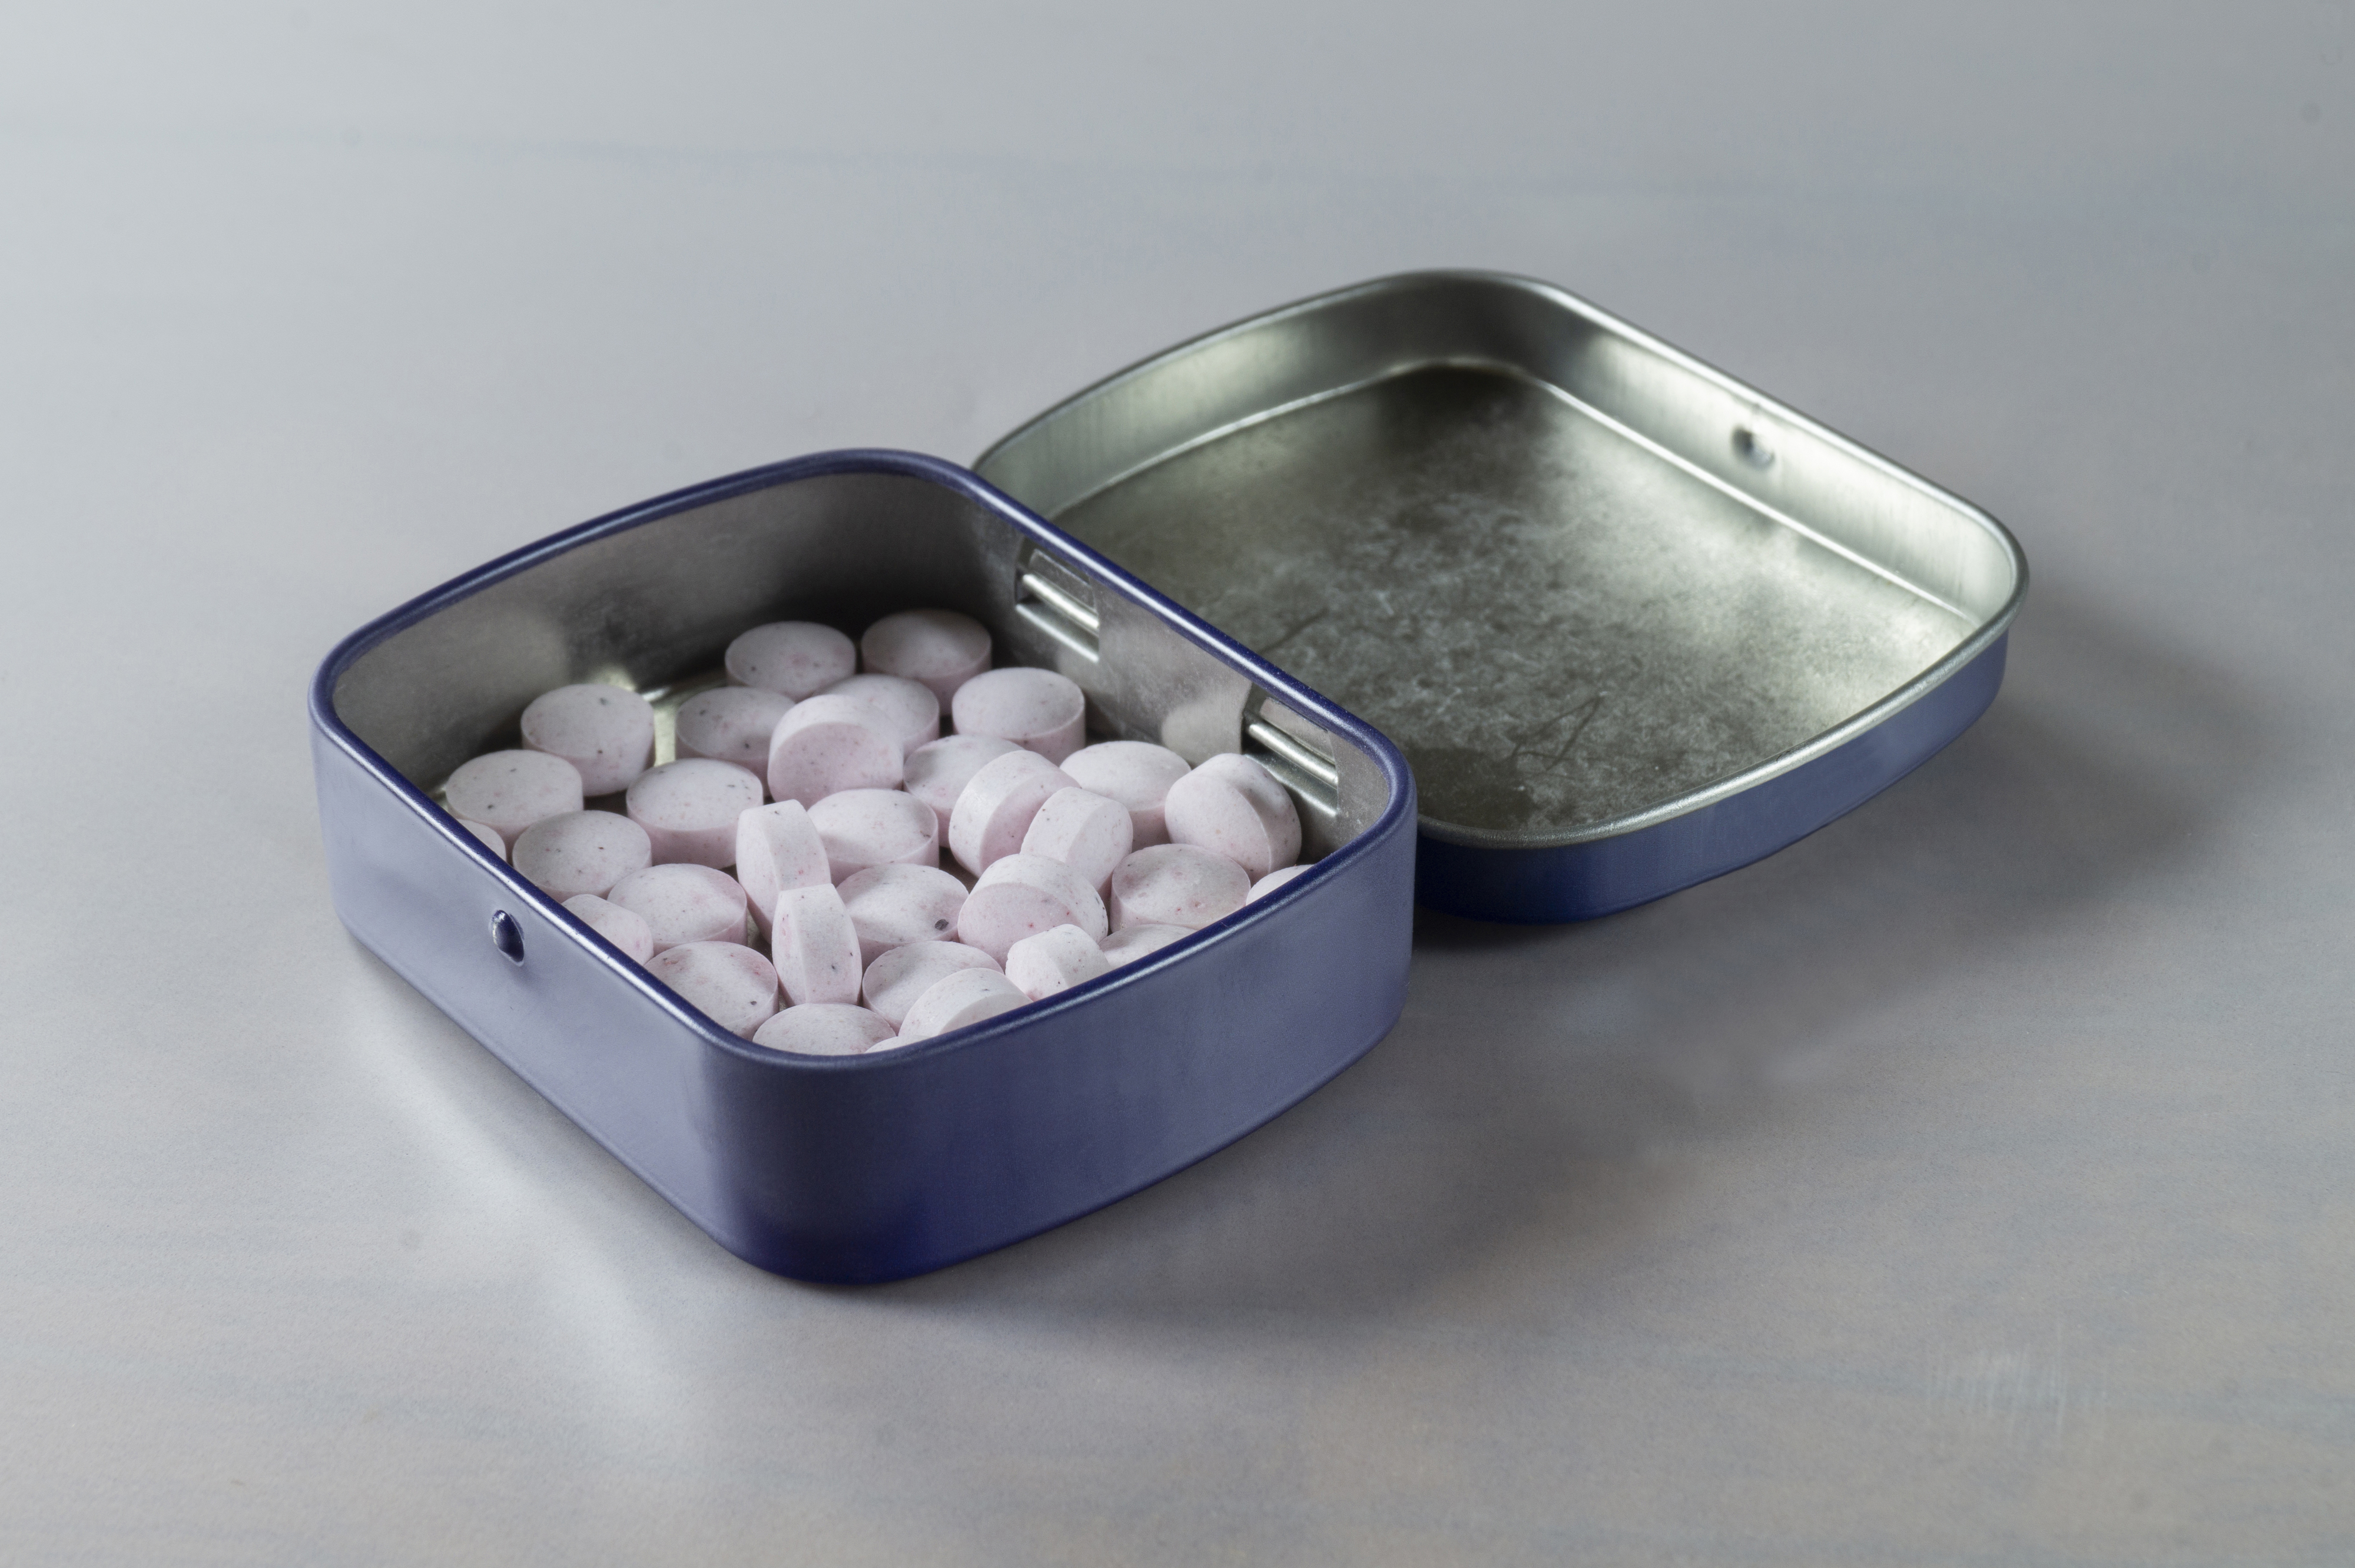 A tin of mints half-opened on a table